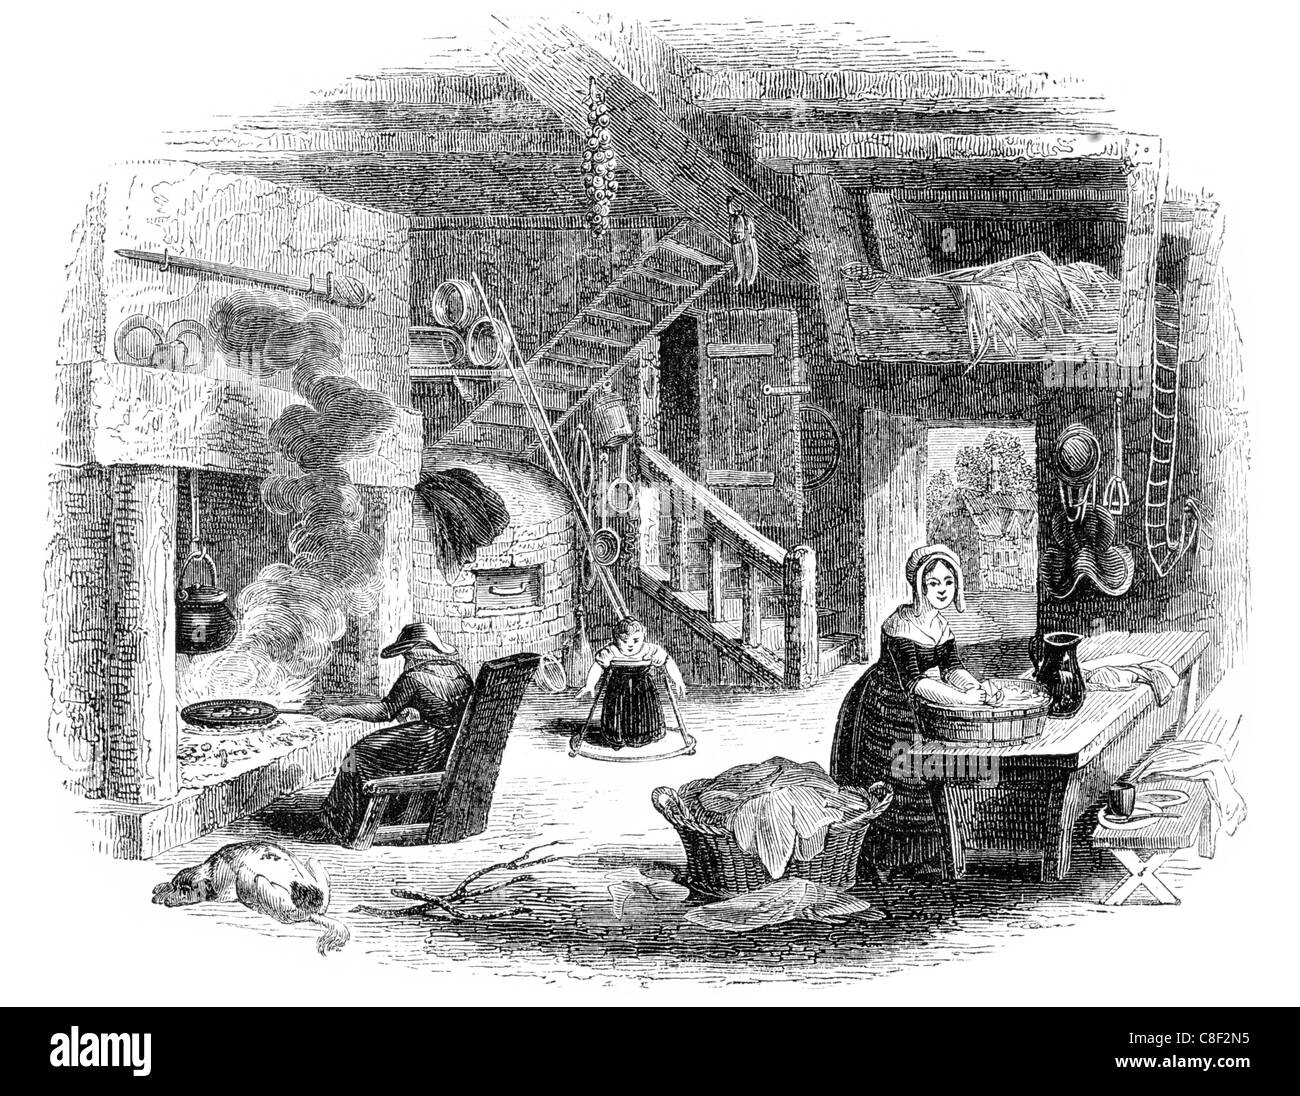 fireplace of old English cottage Heritage stove kitchen living room dining chair firesmoke chimney peasant poor country Stock Photo